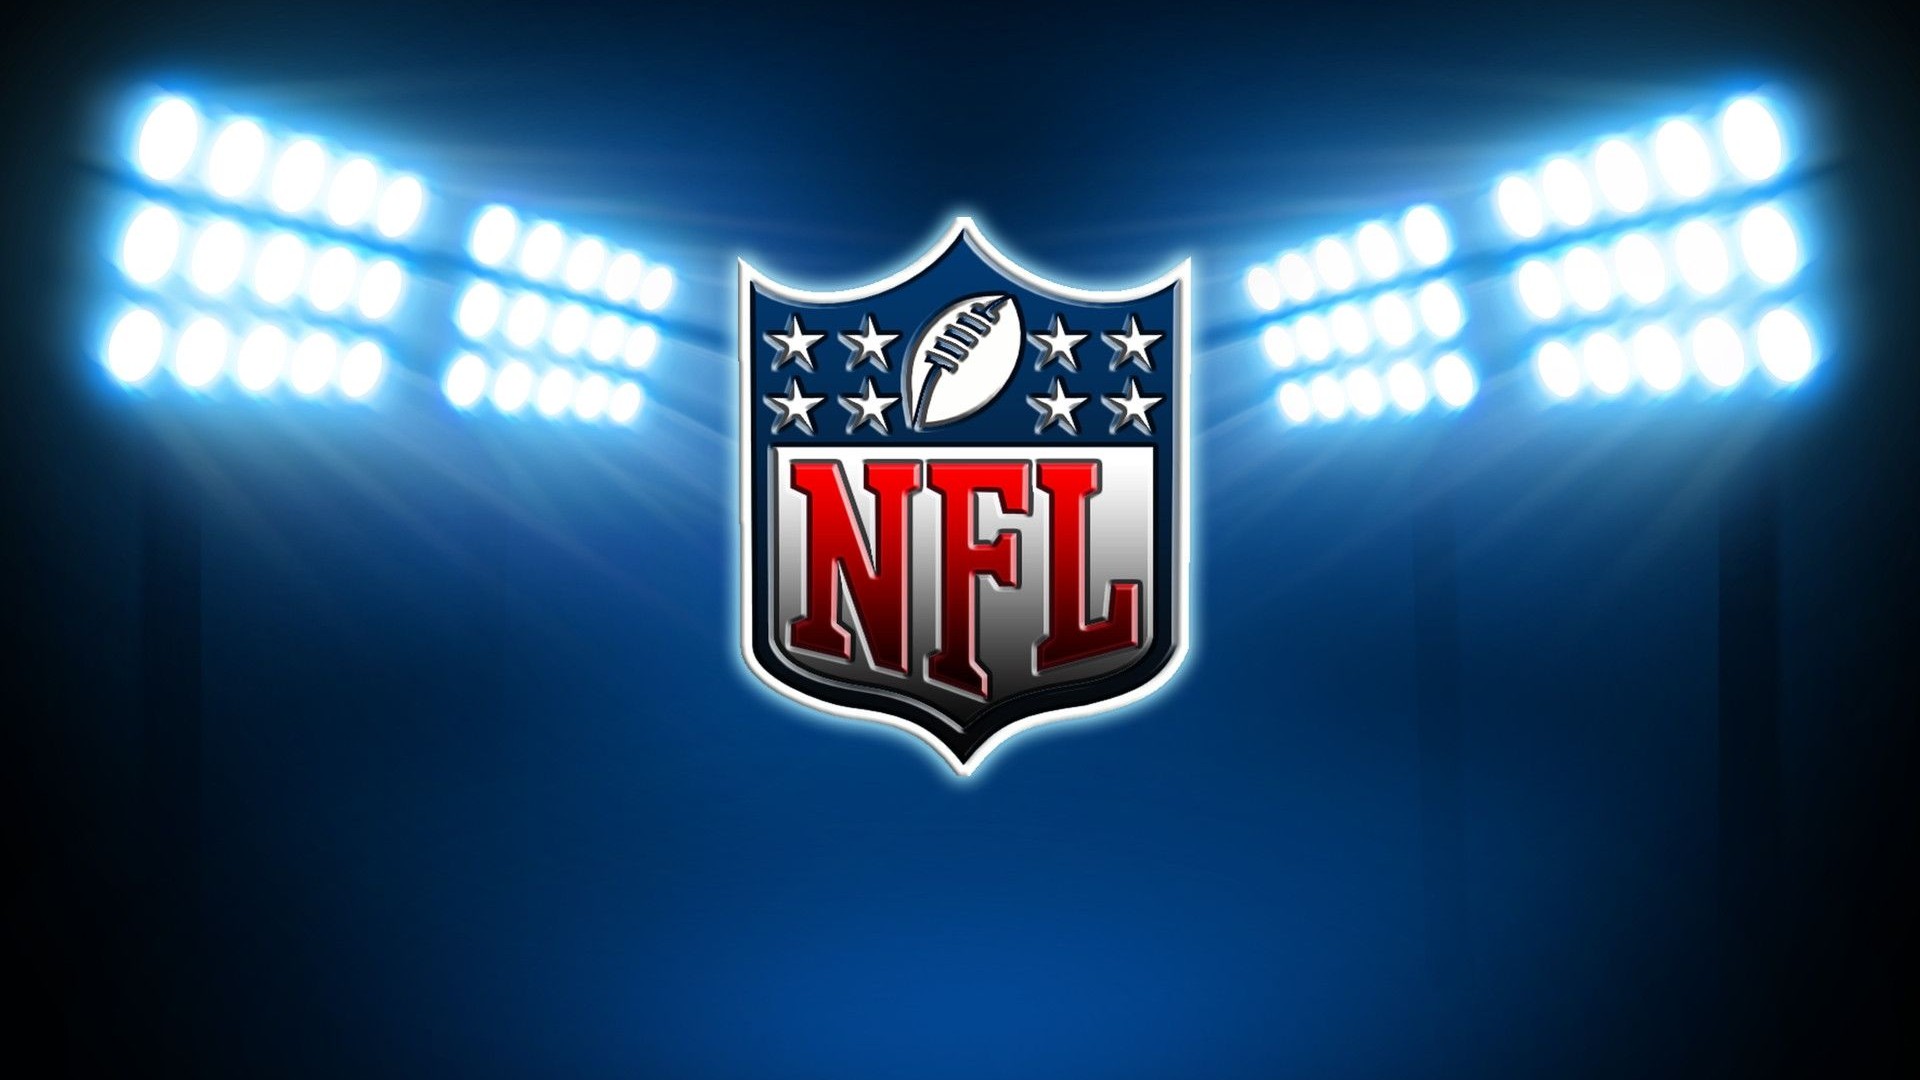 Backgrounds NFL HD With Resolution 1920X1080